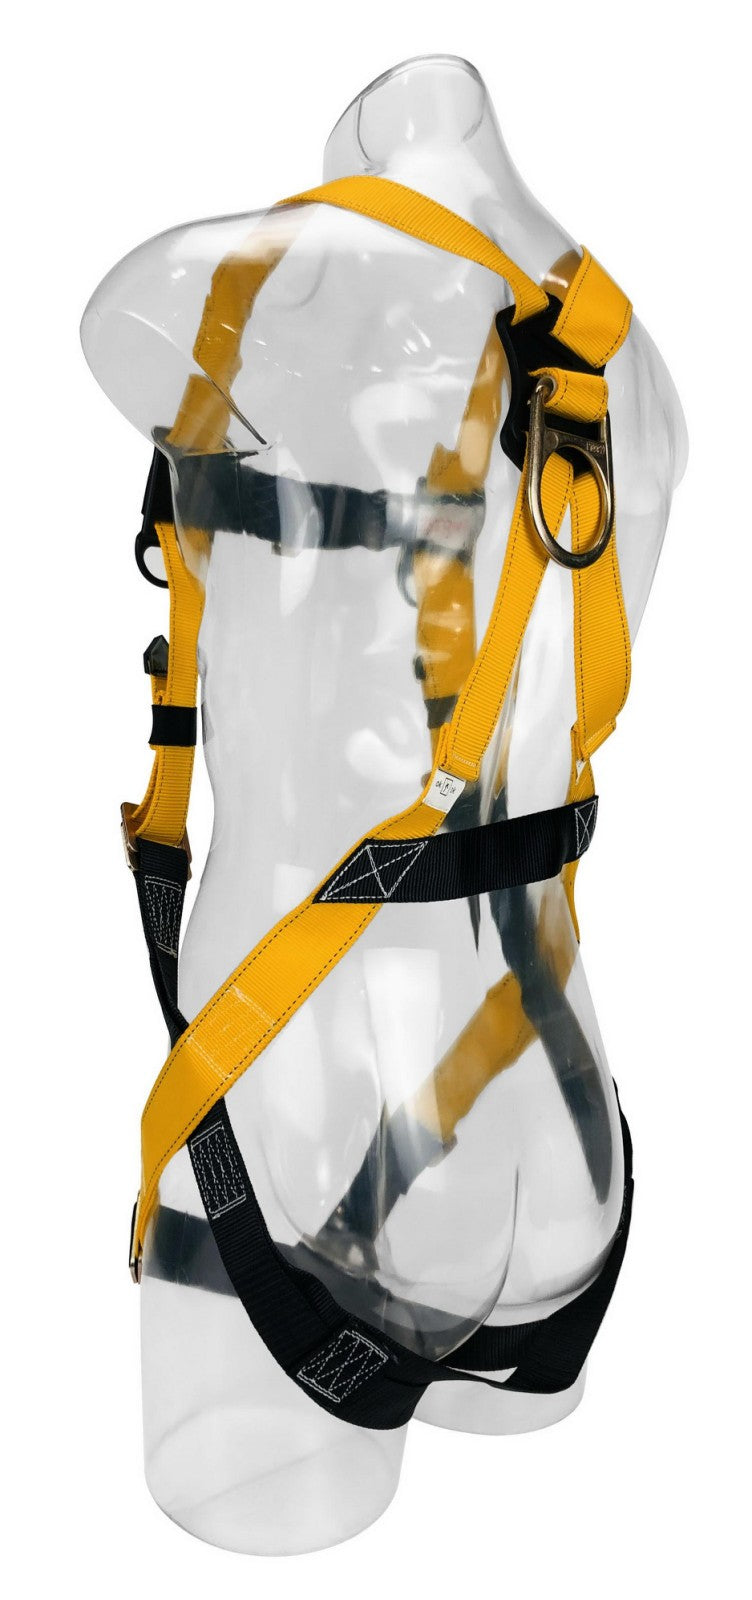 FULL BODY REFLECTOR SAFETY HARNESS